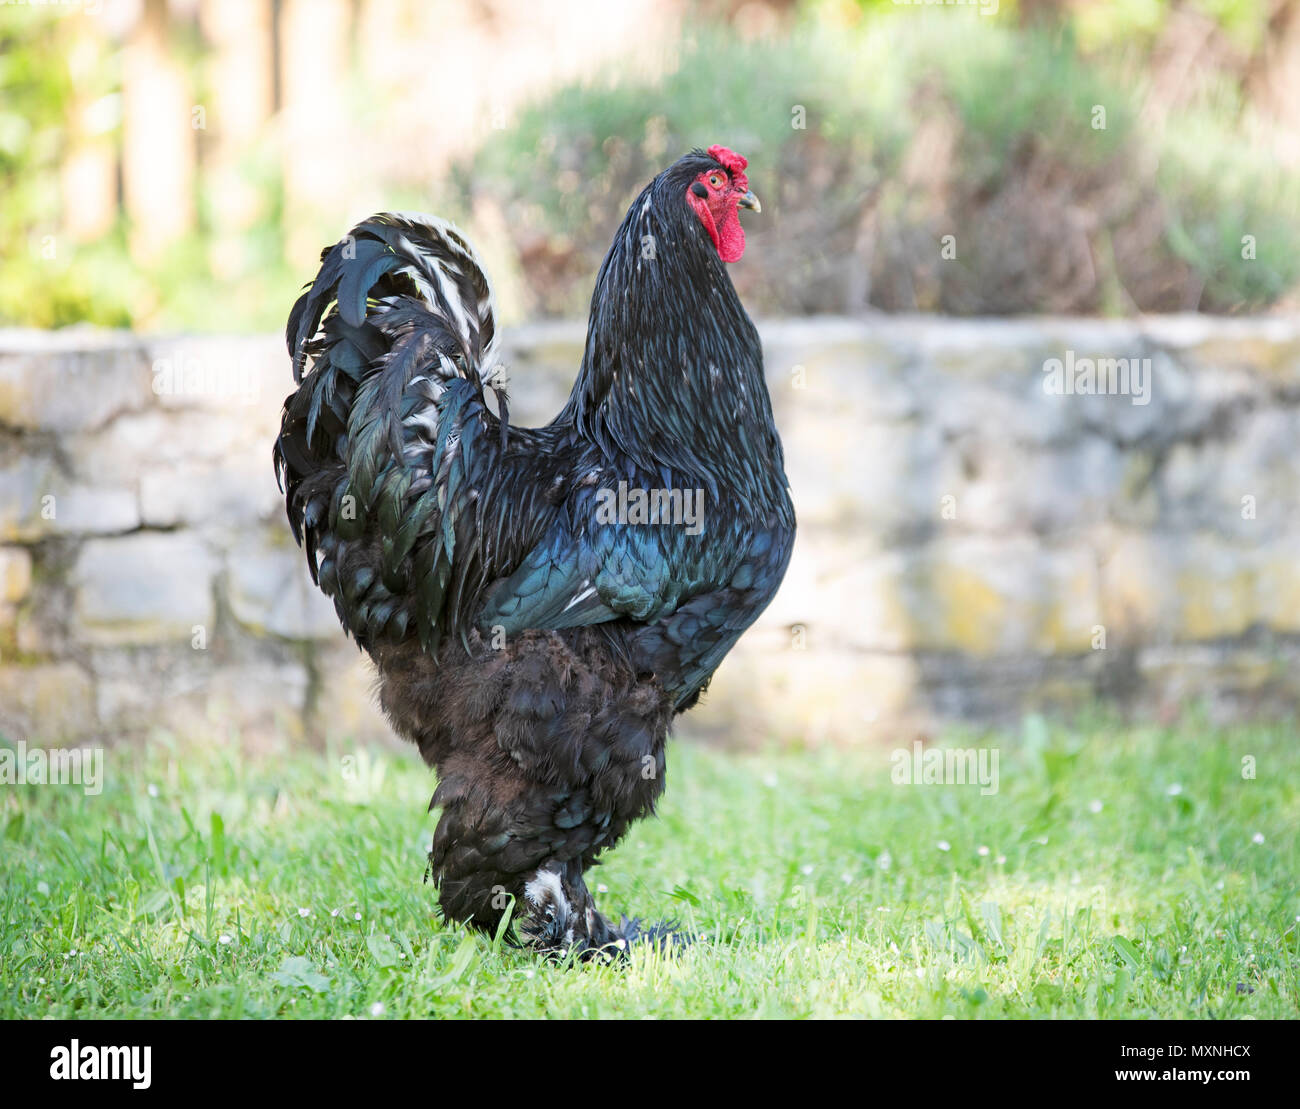 brahma rooster in a garden in spring Stock Photo - Alamy